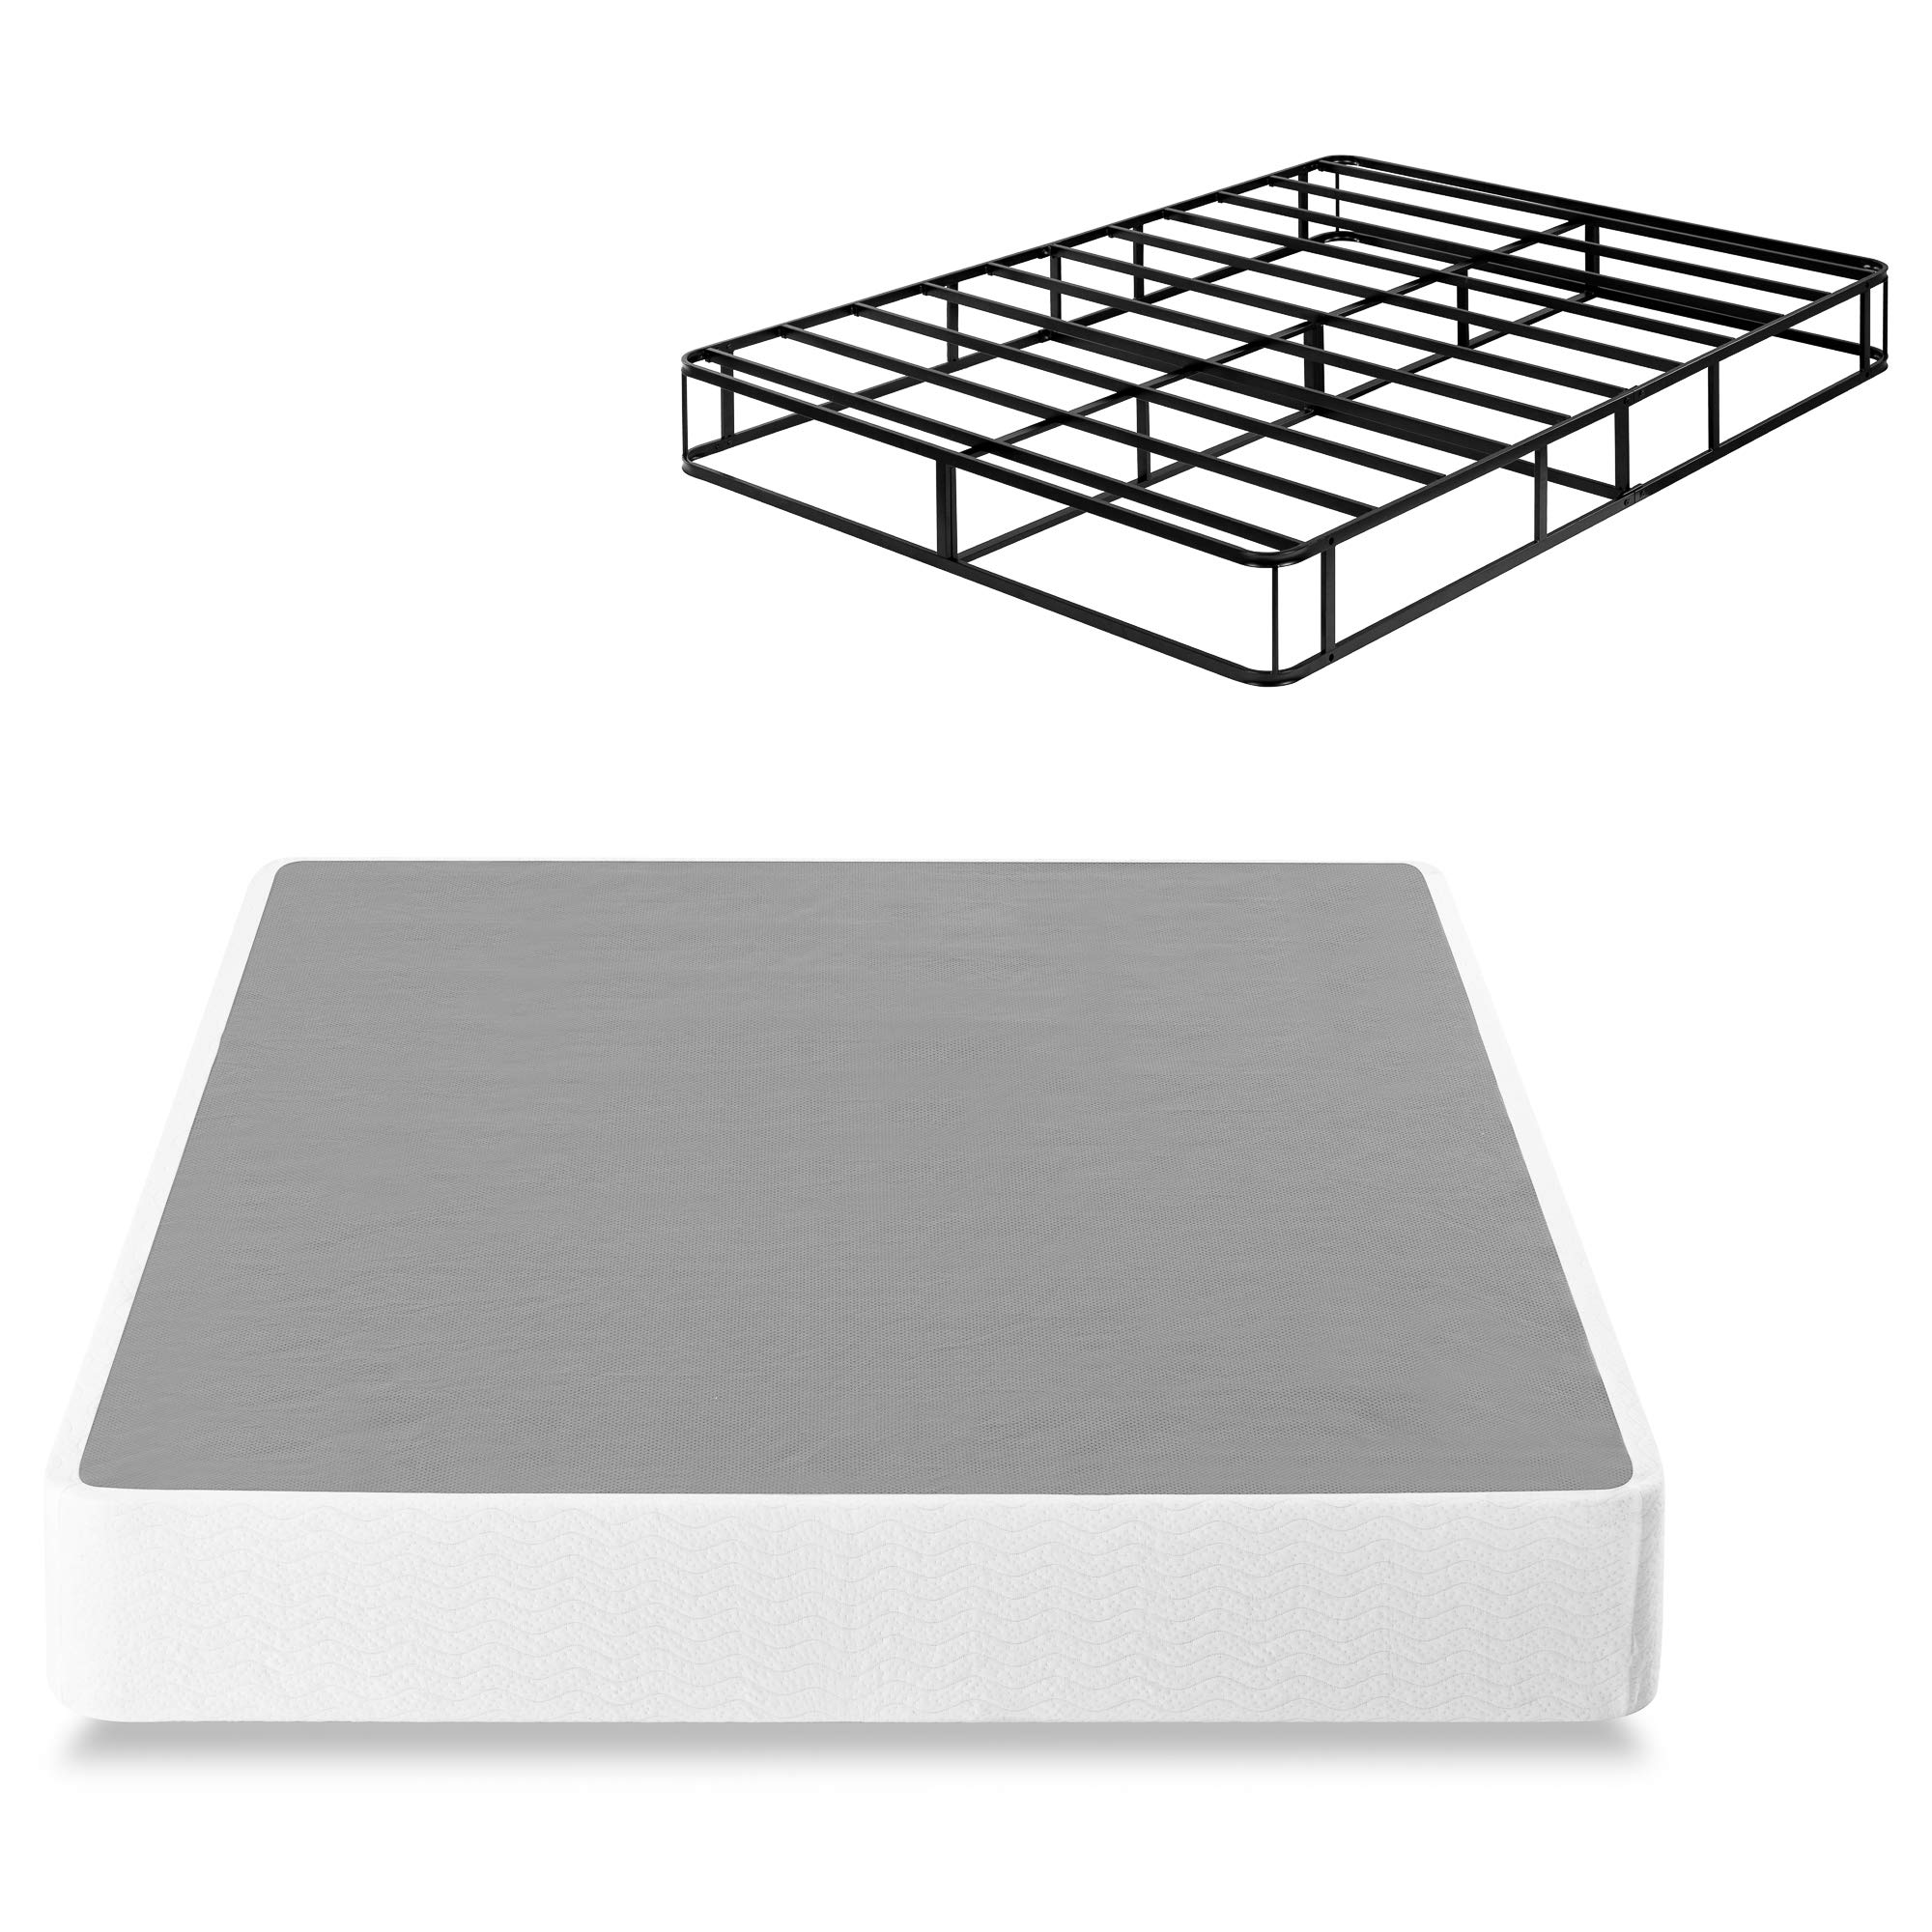 ZINUS 9 Inch Metal Smart Box Spring / Mattress Foundation / Strong Metal Frame / Easy Assembly, Queen